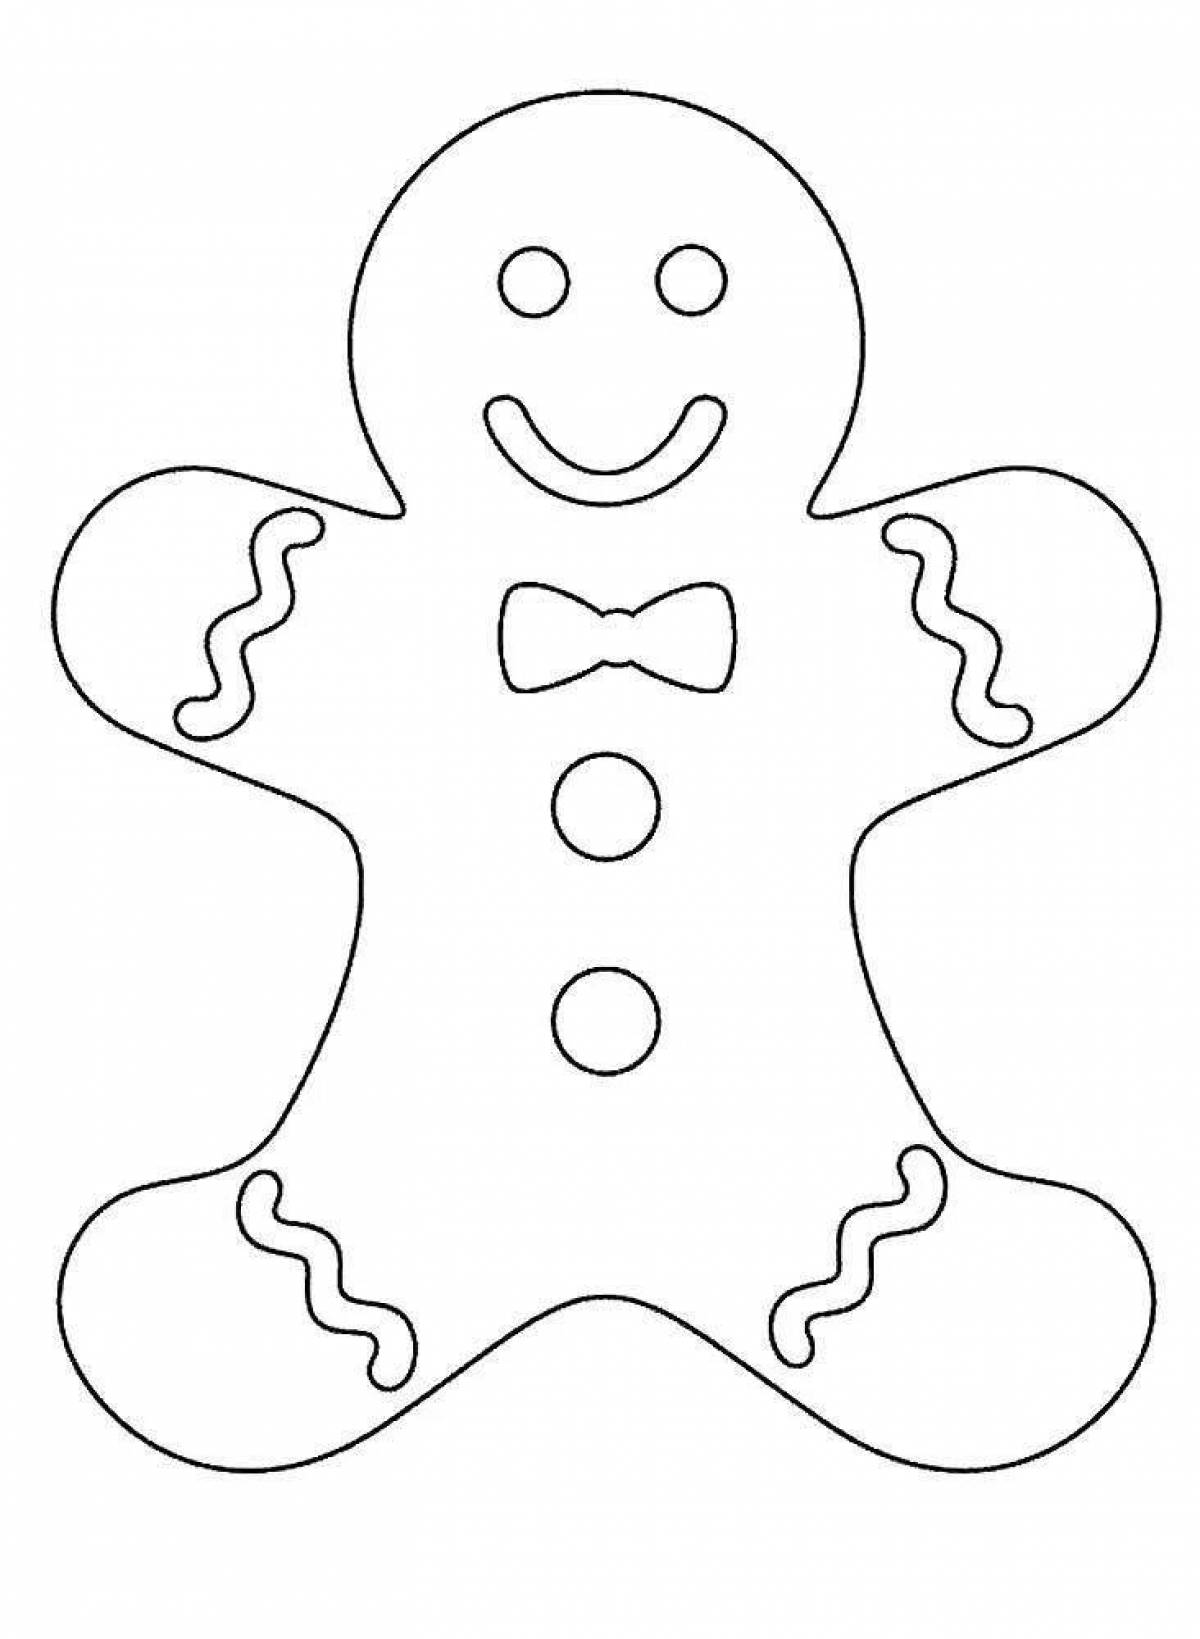 Coloring page of colorful cookie